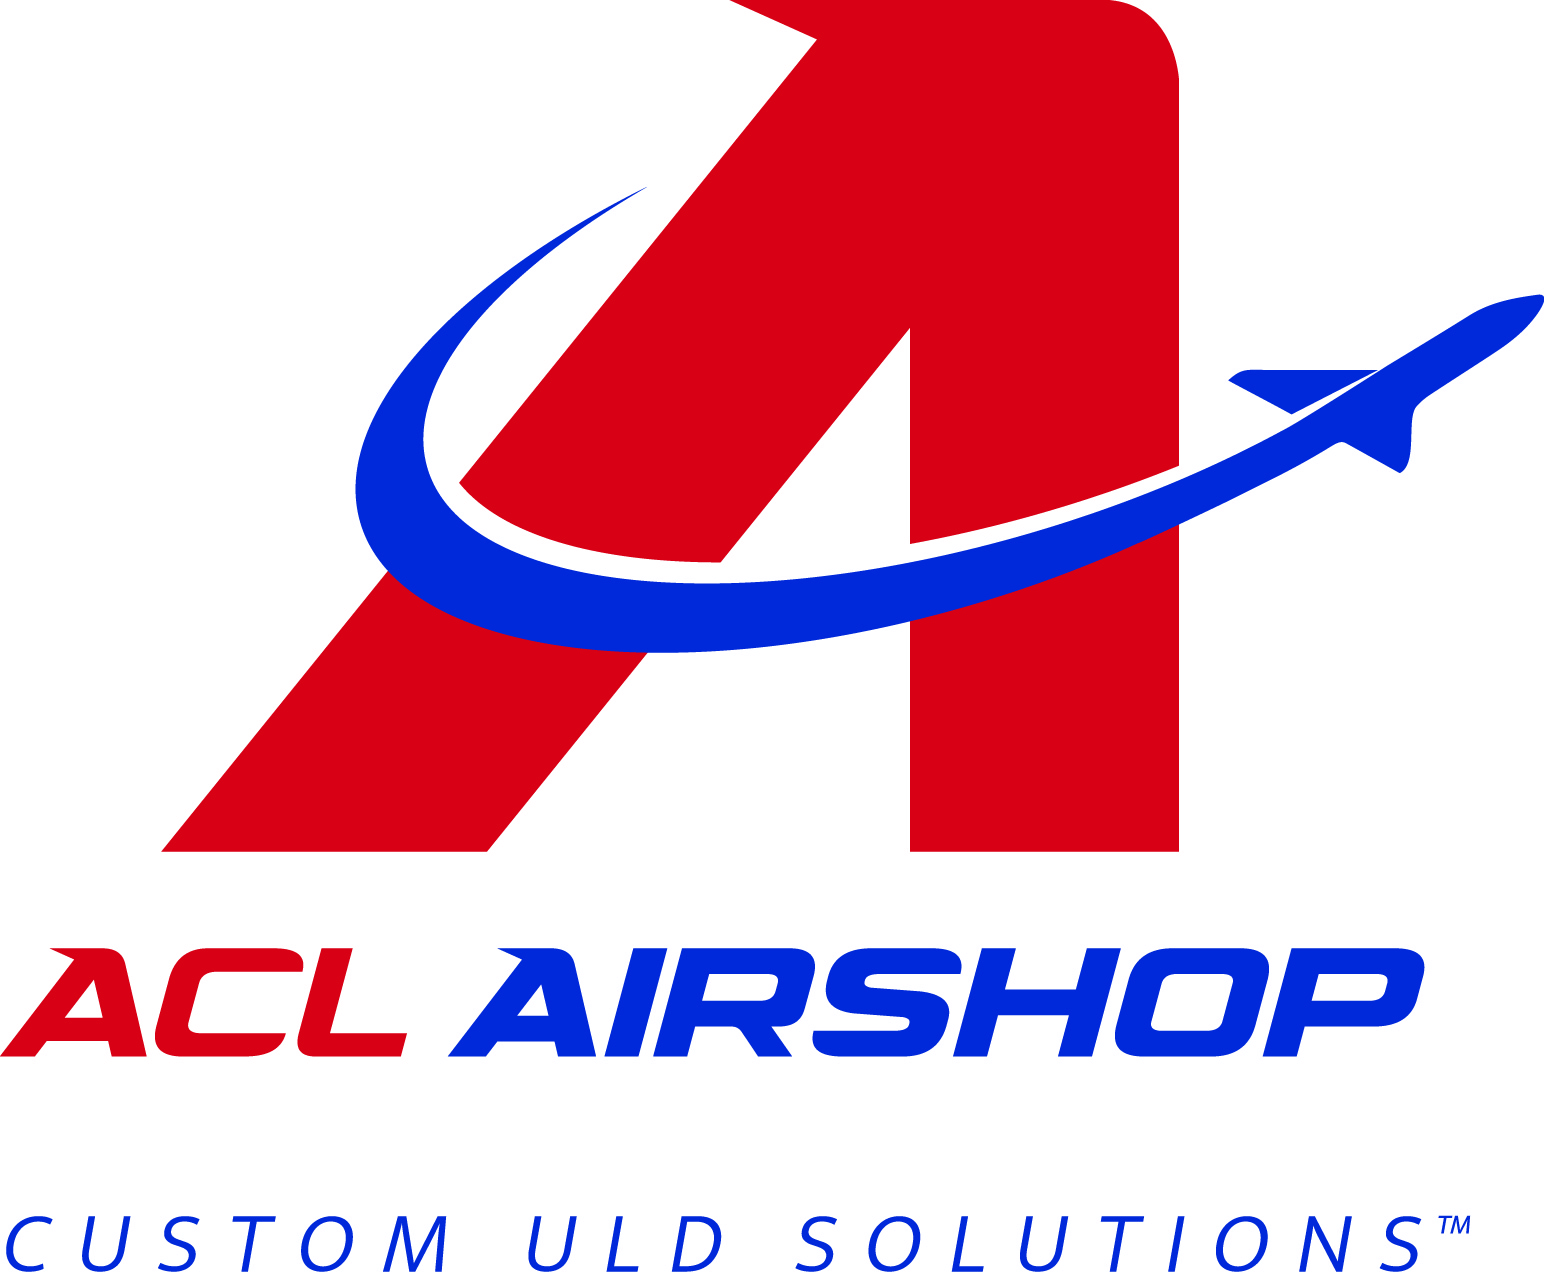 ACL AIRSHOP